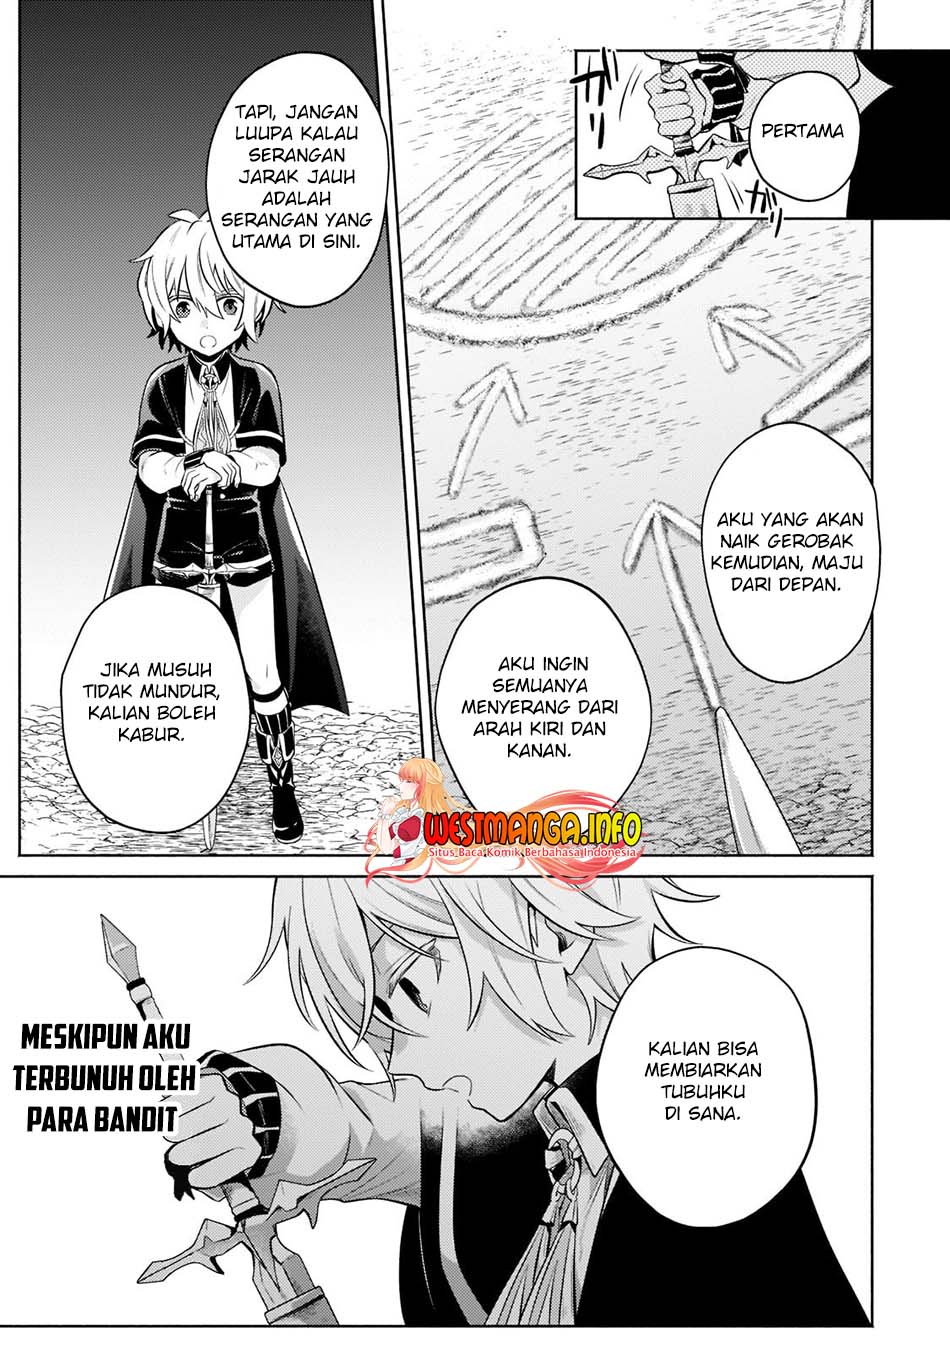 Fun Territory Defense Of The Easy-going Lord ~the Nameless Village Is Made Into The Strongest Fortified City By Production Magic~ Chapter 05